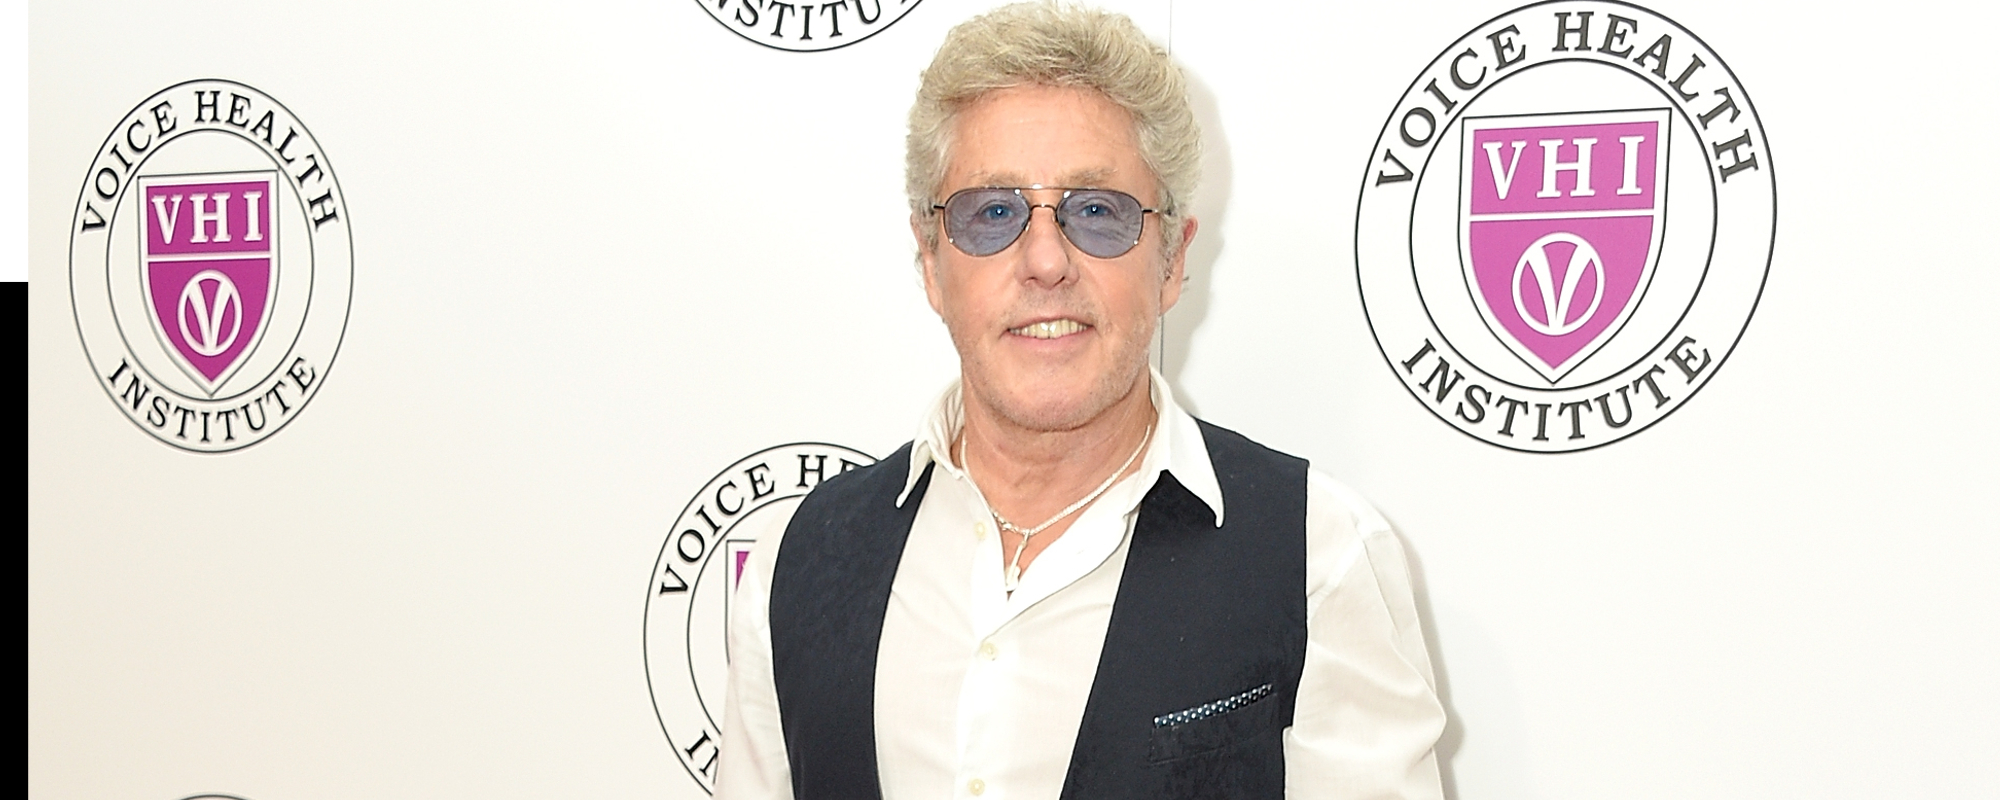 The Who’s Roger Daltrey Claims “My Generation” Is To Blame for NHS Crisis: “Let’s Just Die!”